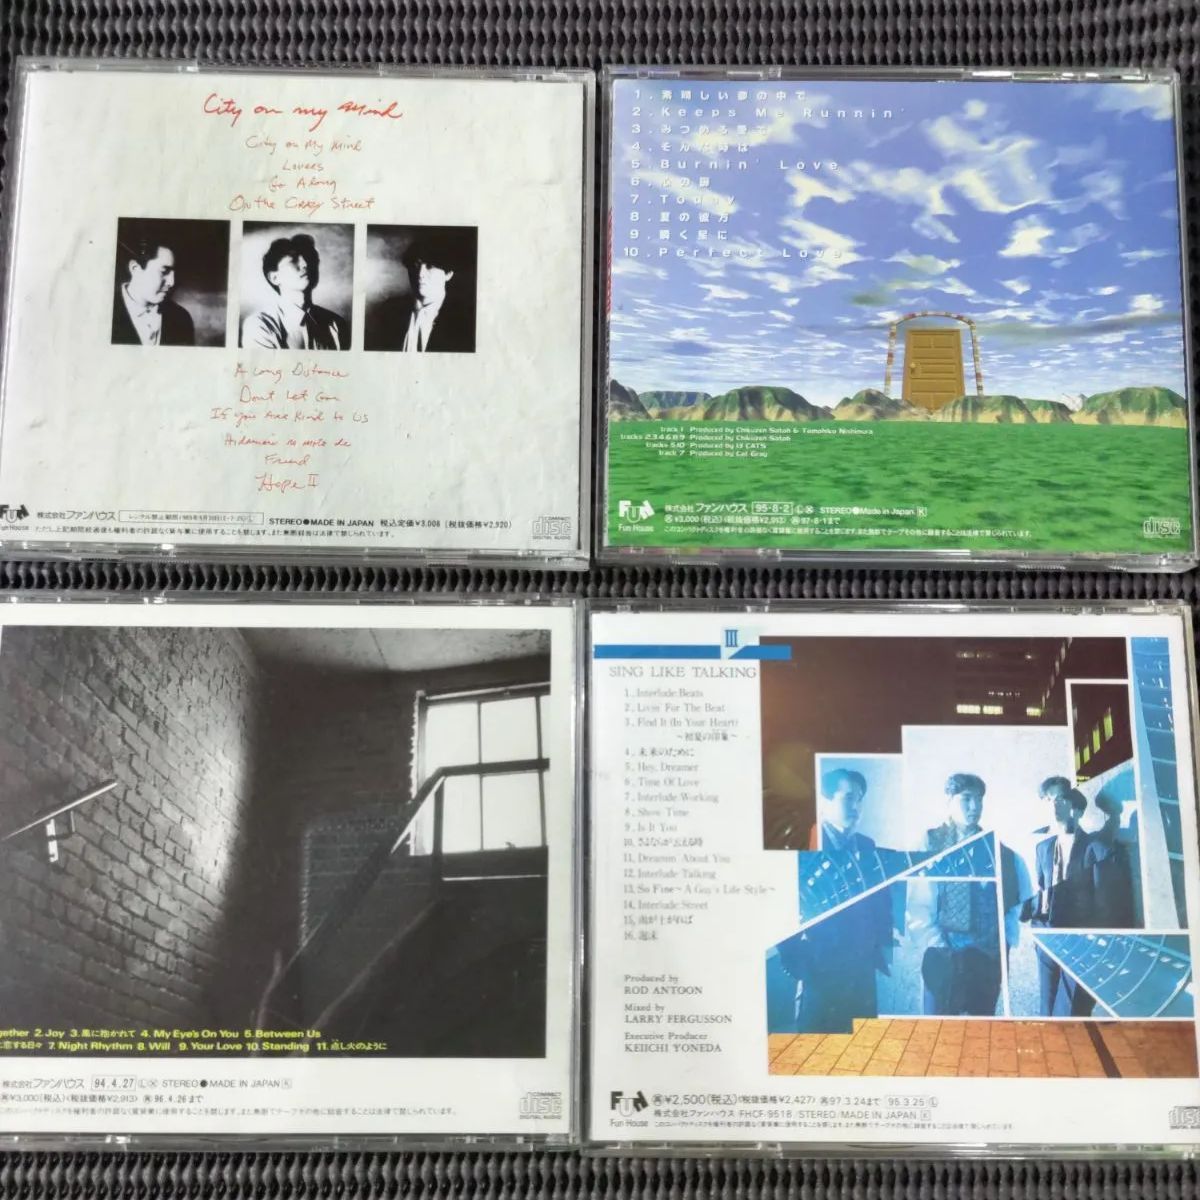   SING LIKE TALKINGアルバム４選   CITY ON MY MIND   ディスカヴァリー   togetherness  SING  LIKE TALKING III